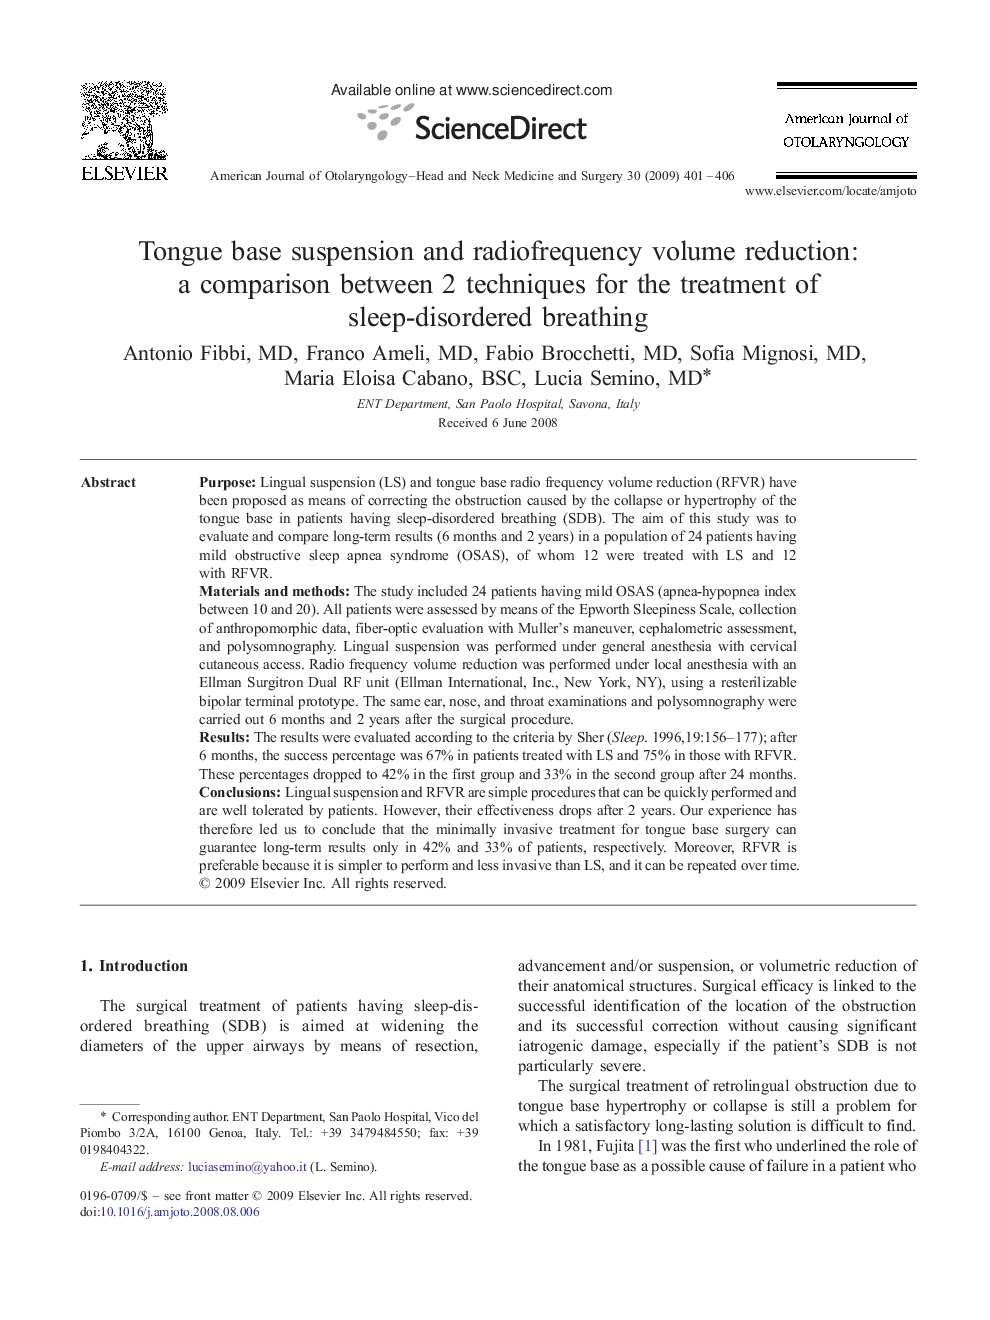 Tongue base suspension and radiofrequency volume reduction: a comparison between 2 techniques for the treatment of sleep-disordered breathing